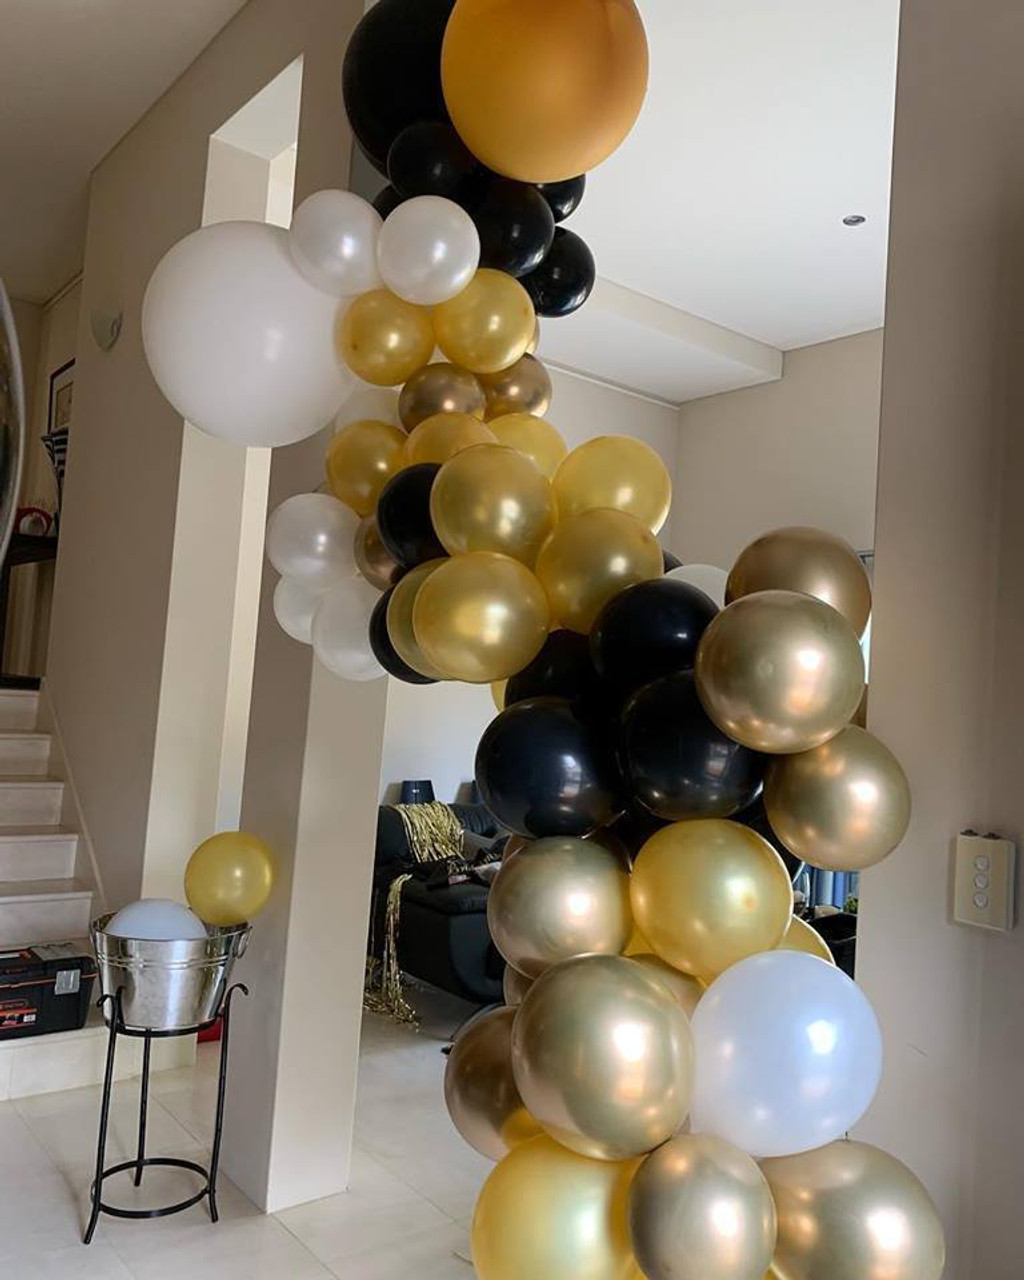 Copy of BALLOON GARLAND PREMIUM  - 4 METRE  (installation &delivery additional) Code- GARLANDPREM4

Includes your choice of latex with additional confetti balloons and/ or chrome finish latex